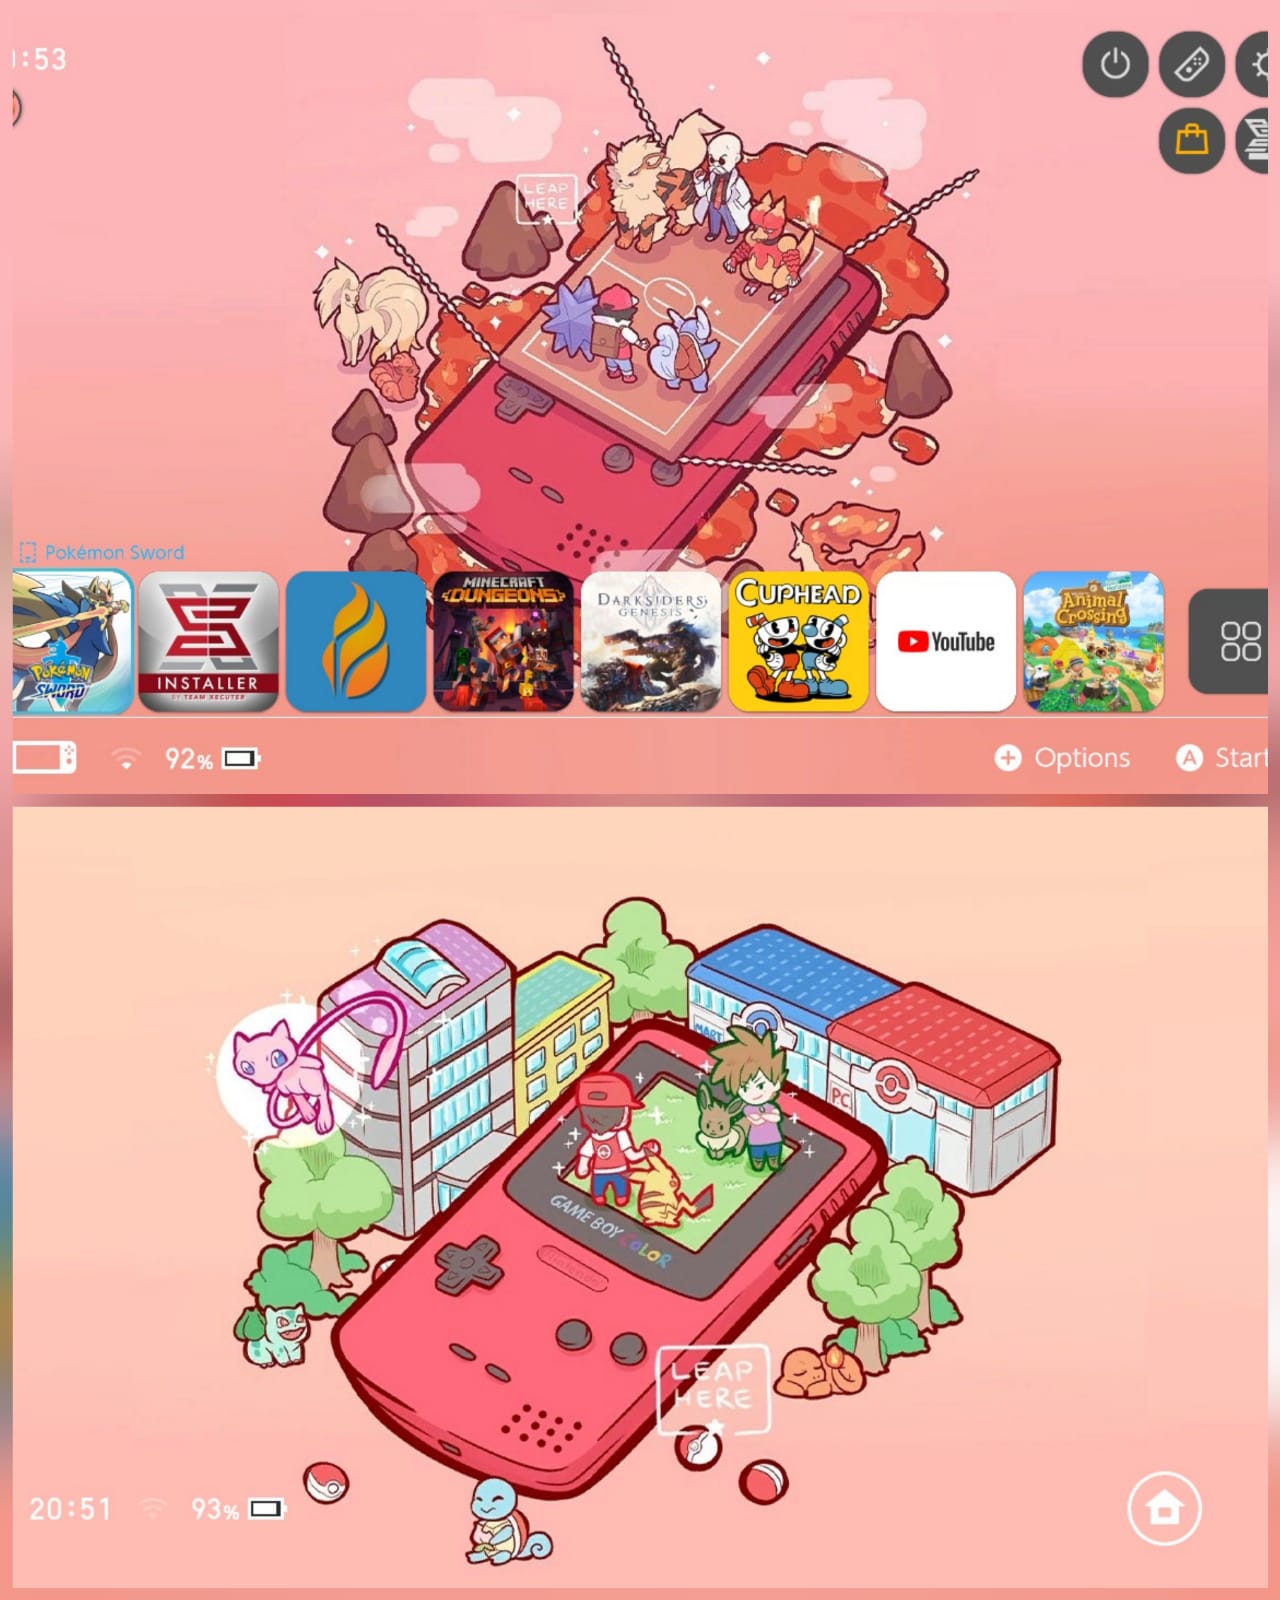 Fell in love with these awesome retro style pokemon wallpaper .The image were a bit low quality(and had 4:3 aspect ration) so i chose to extend the background in order to achieve